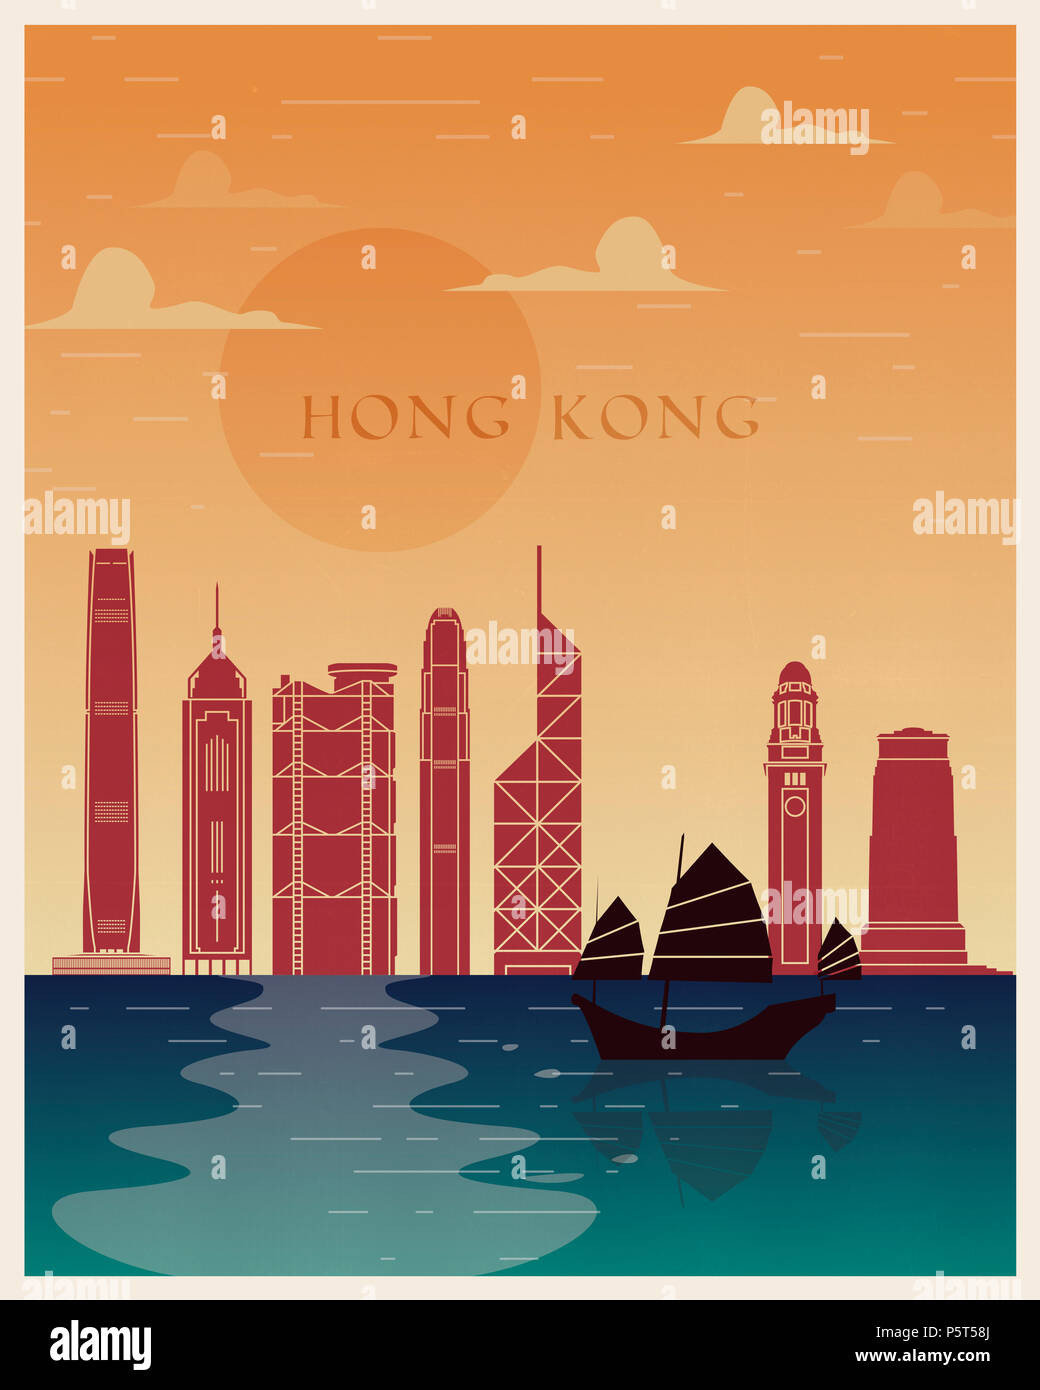 - images Alamy and kong hi-res poster stock Hong photography